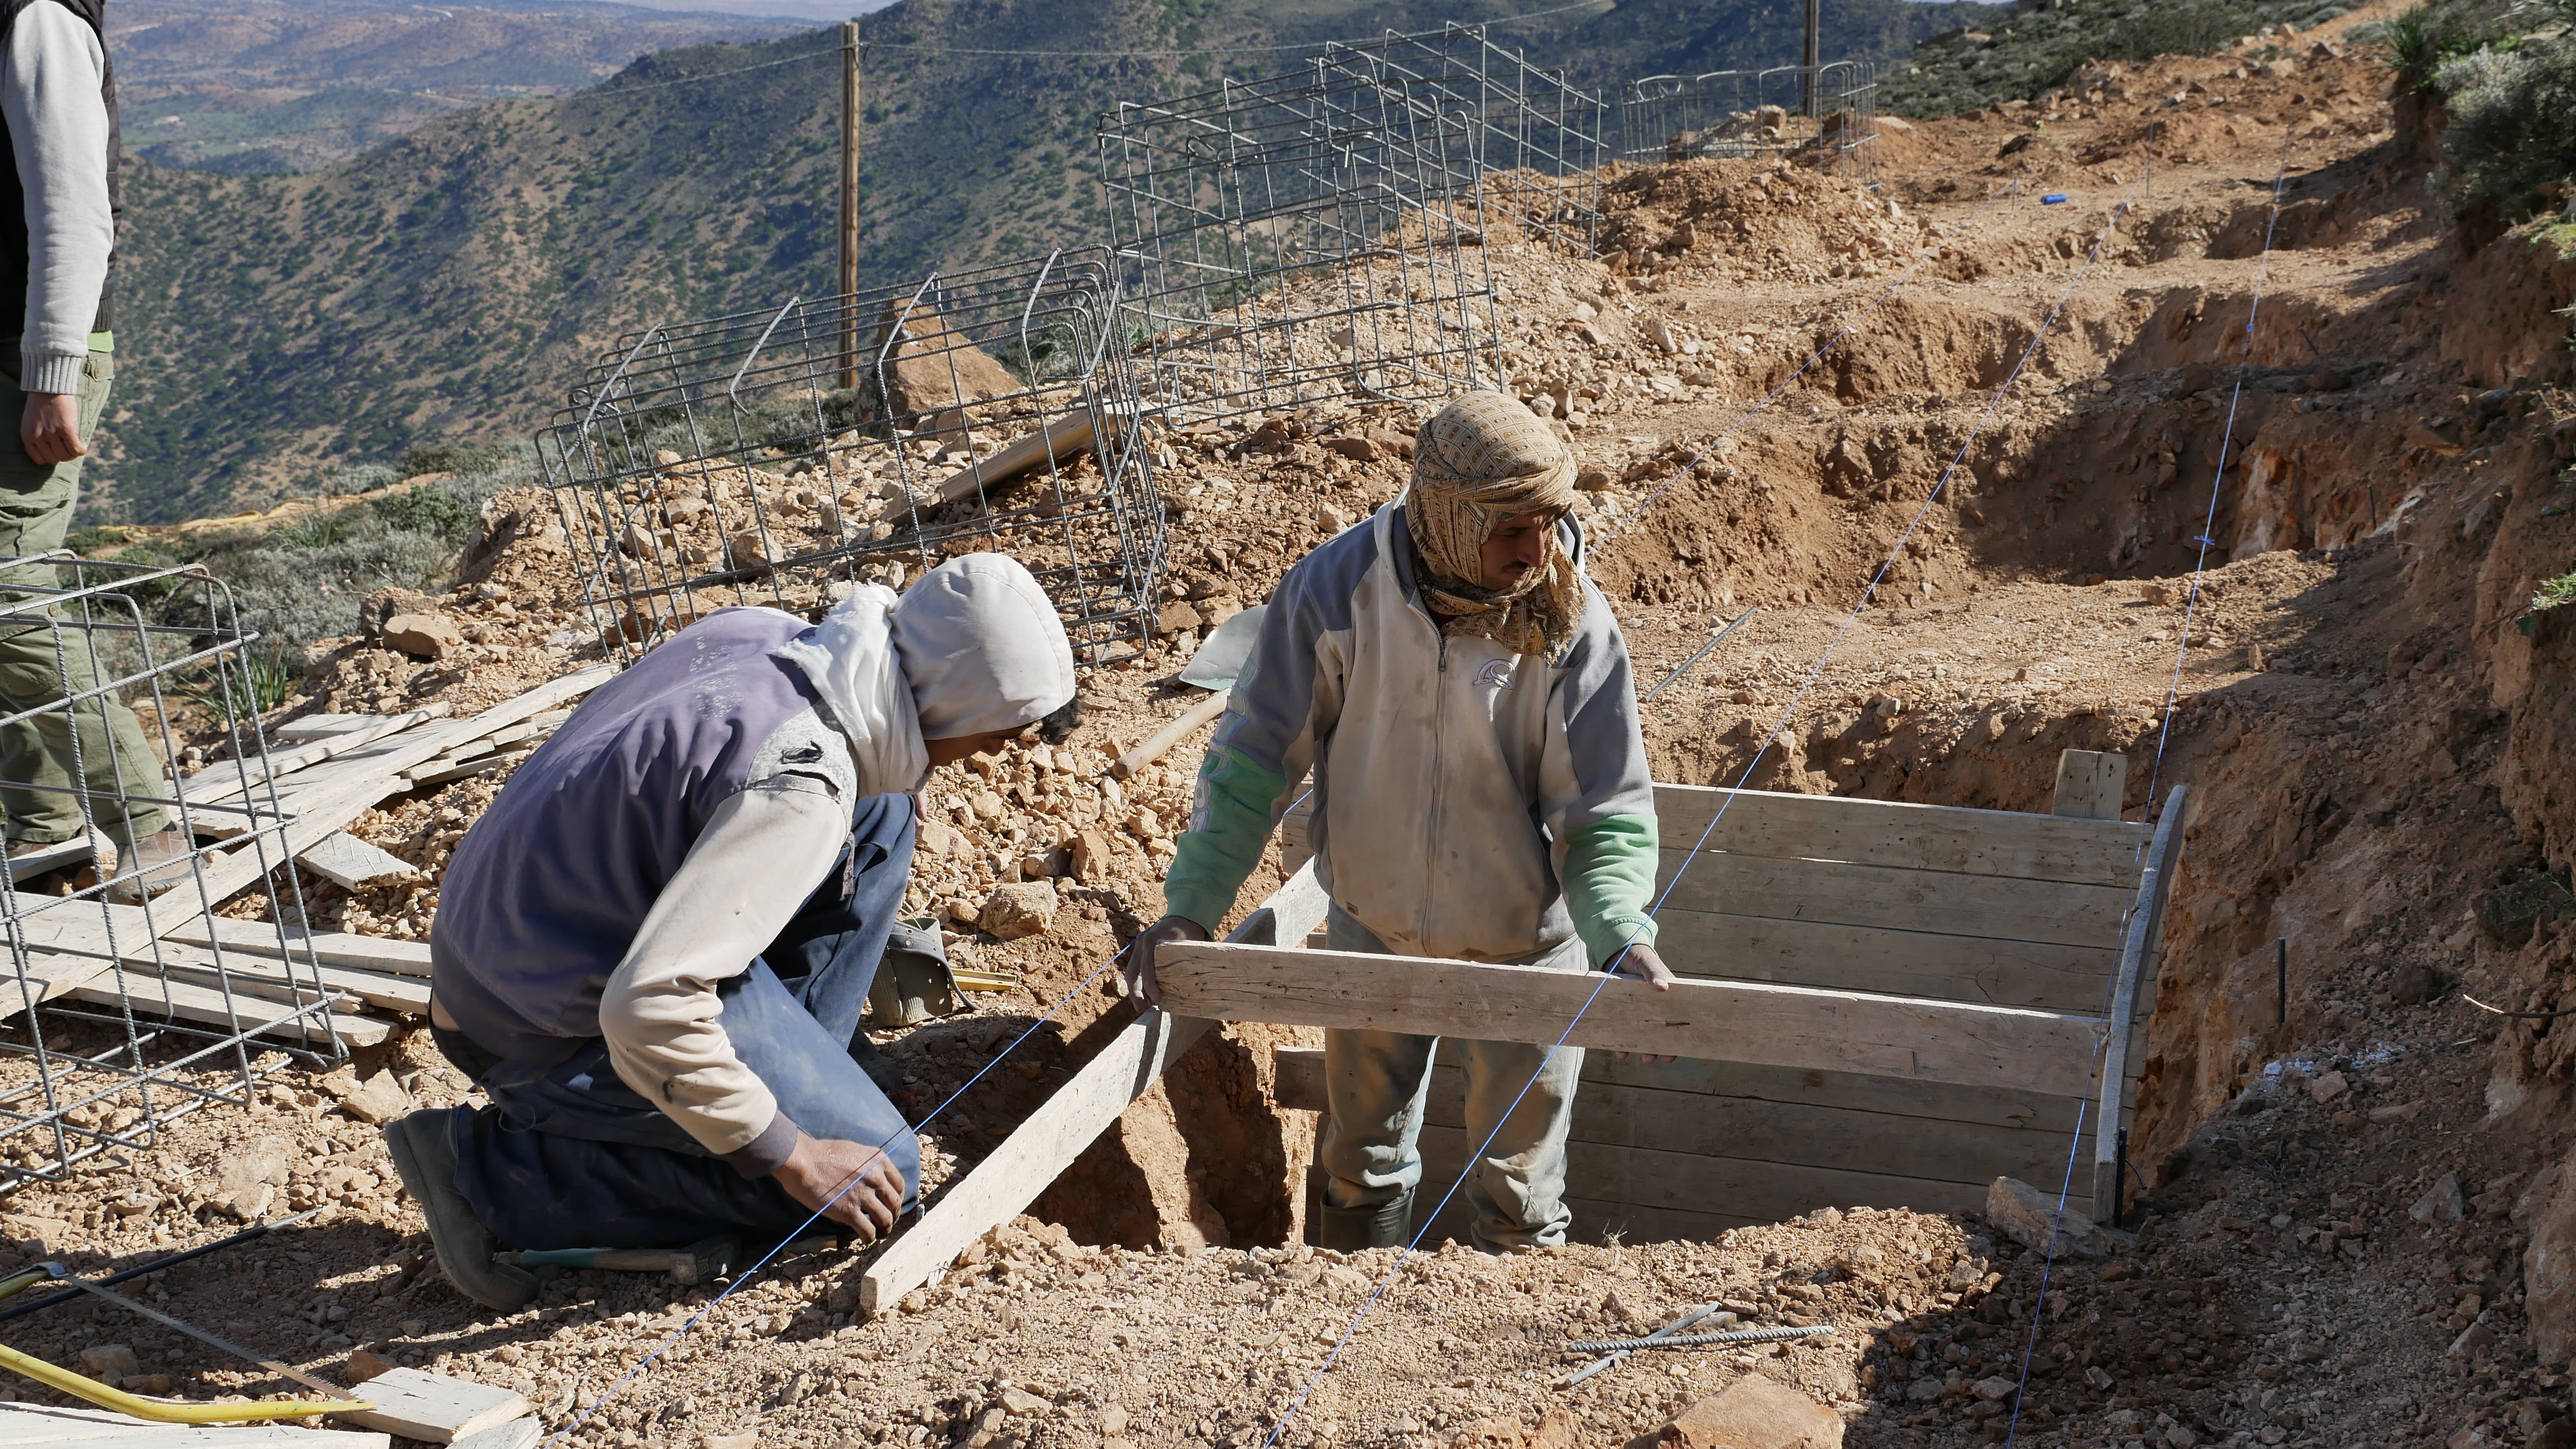 6/17:The Moroccan project staff concentrate on their work: the foundations must be staked out accurately and the formwork built.